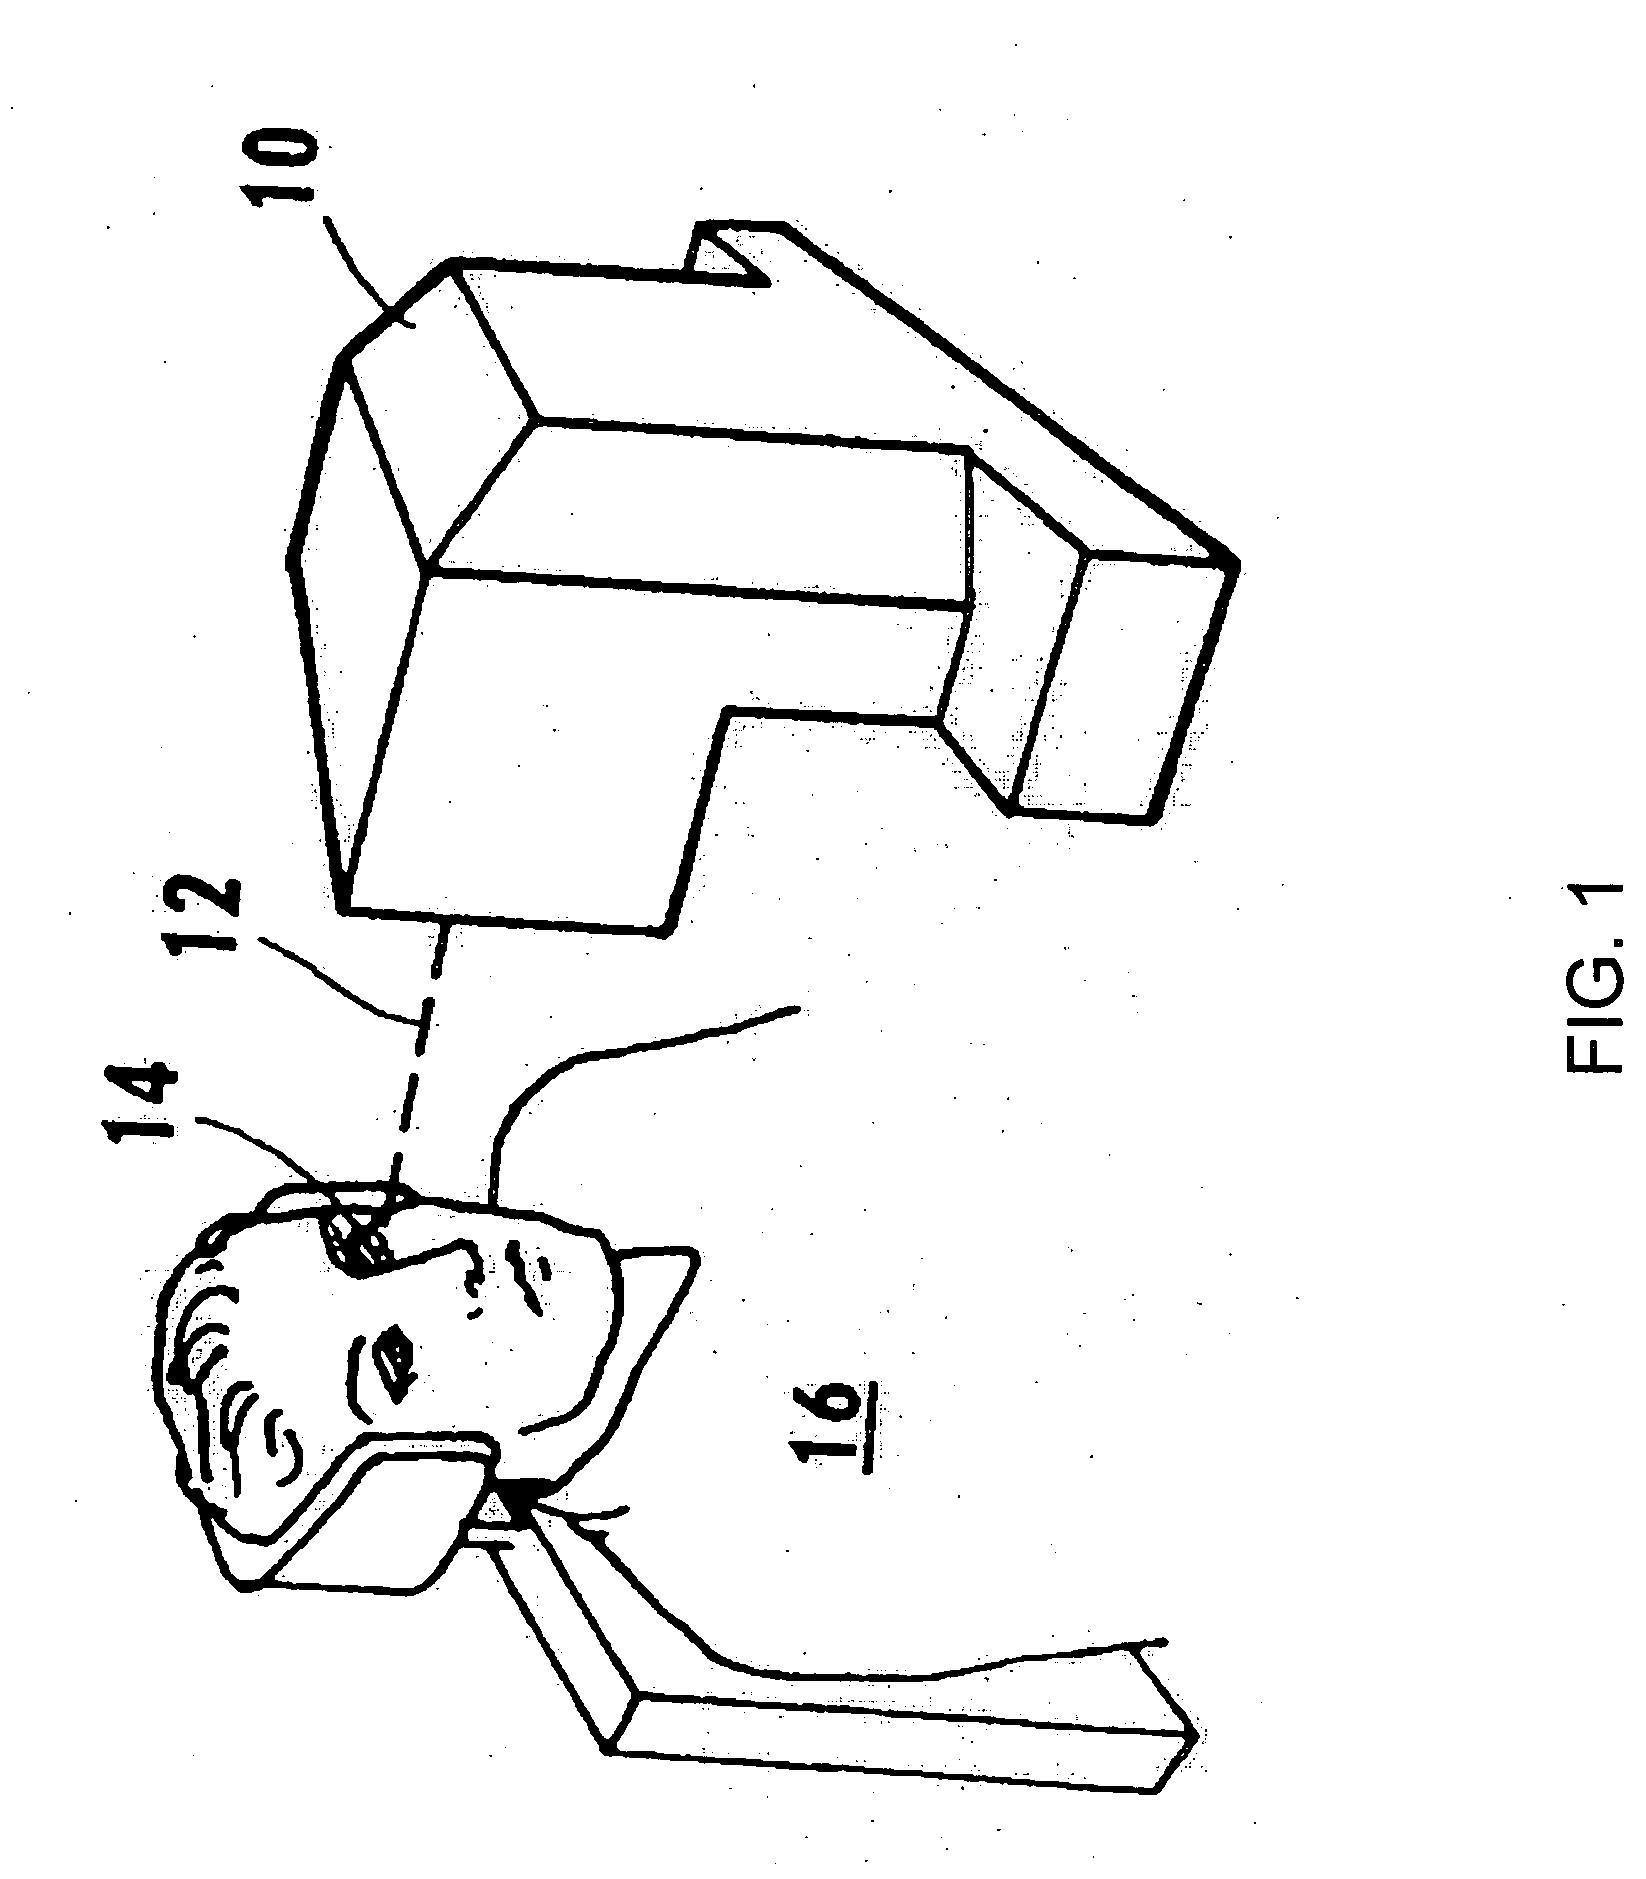 Apparatus and method for correction of abberations in laser system optics